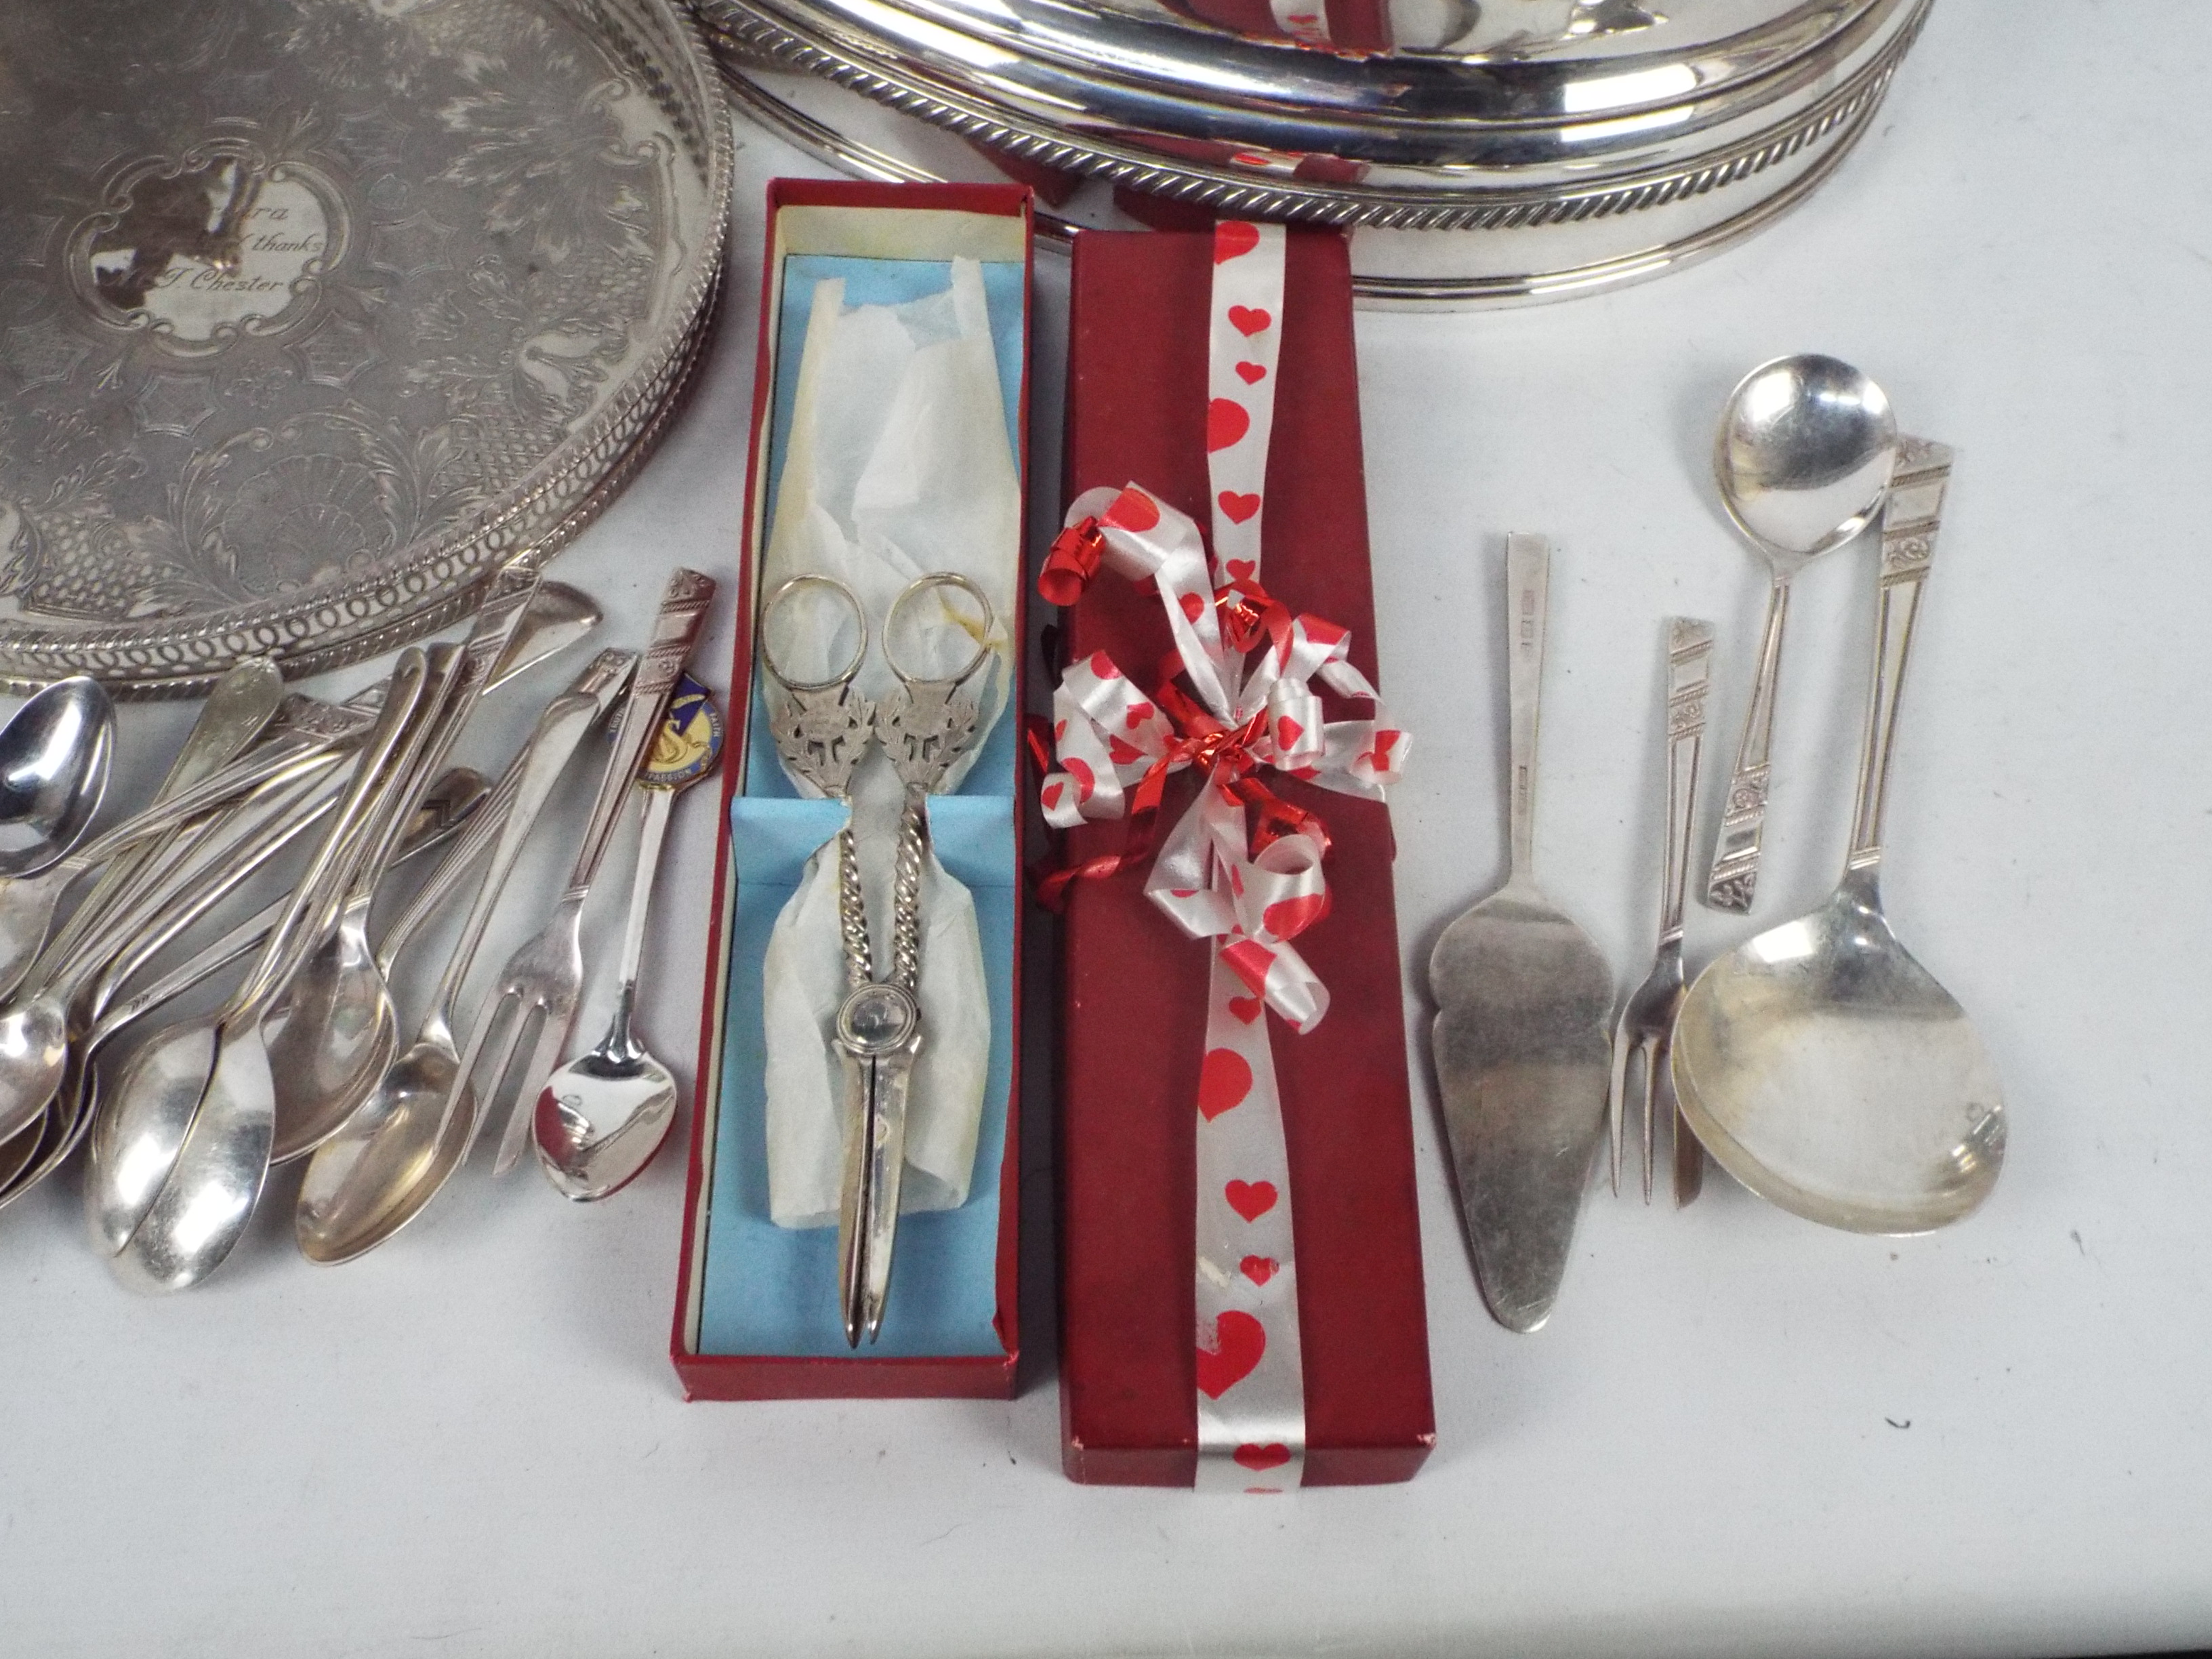 A collection of plated wares to include a cloche, tray, flatware and other. - Image 4 of 6